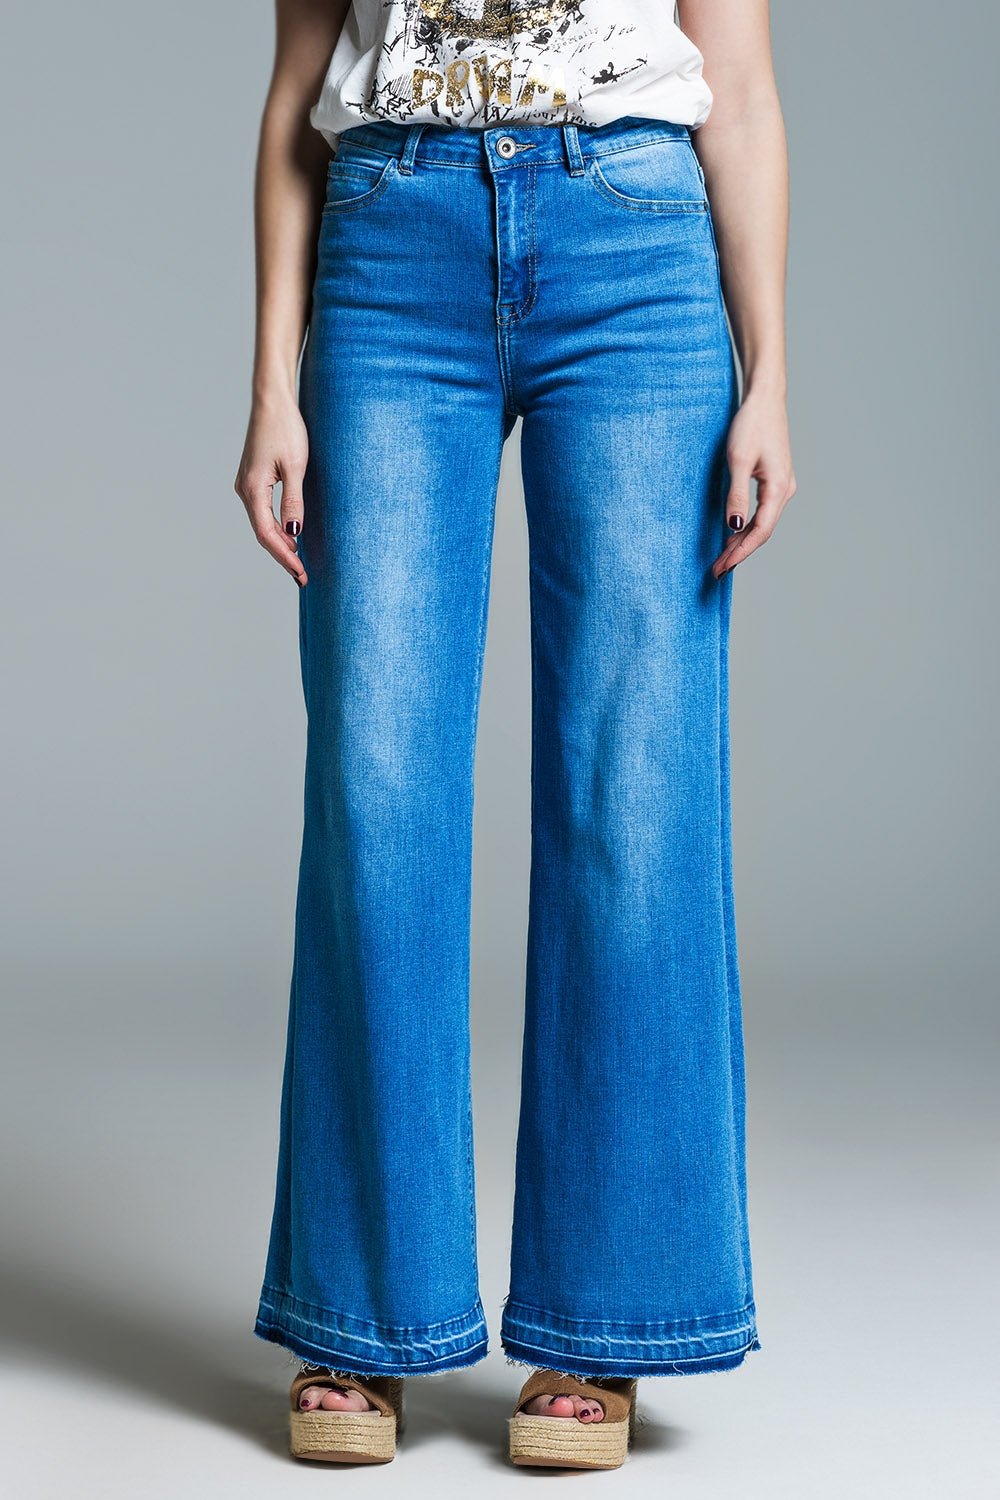 Palazzo Style Jeans in Mid Wash With Double Stitching Detail at the Hem - Mack & Harvie